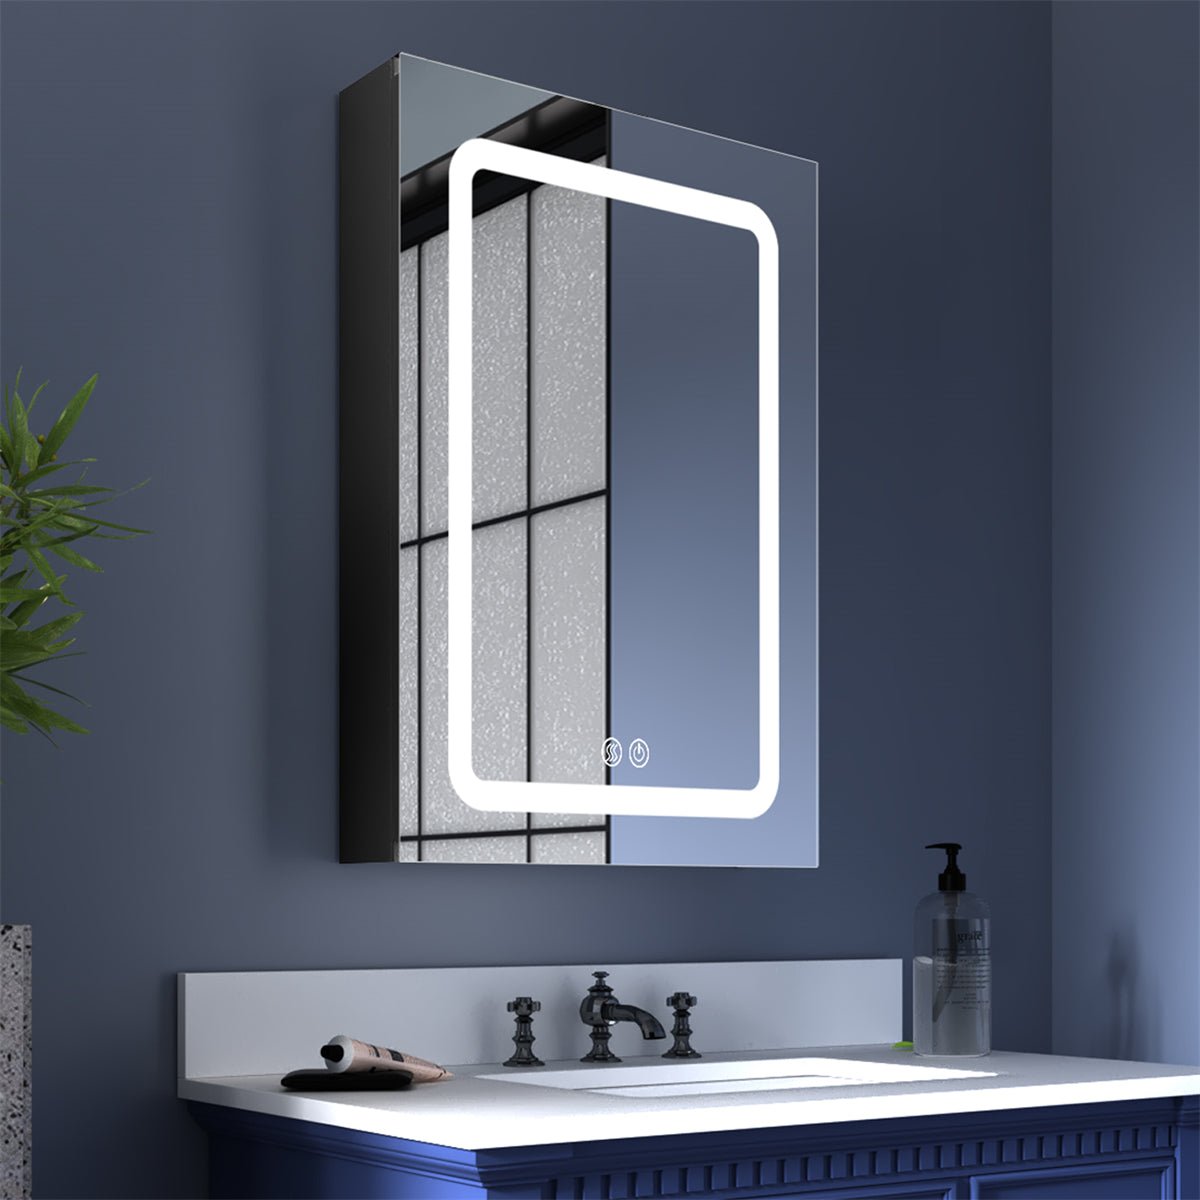 ExBrite 20 in. W x 30 in. H LED Bathroom Medicine Cabinet Surface Mounted Cabinets with Lighted Mirror Right Open - ExBriteUSA